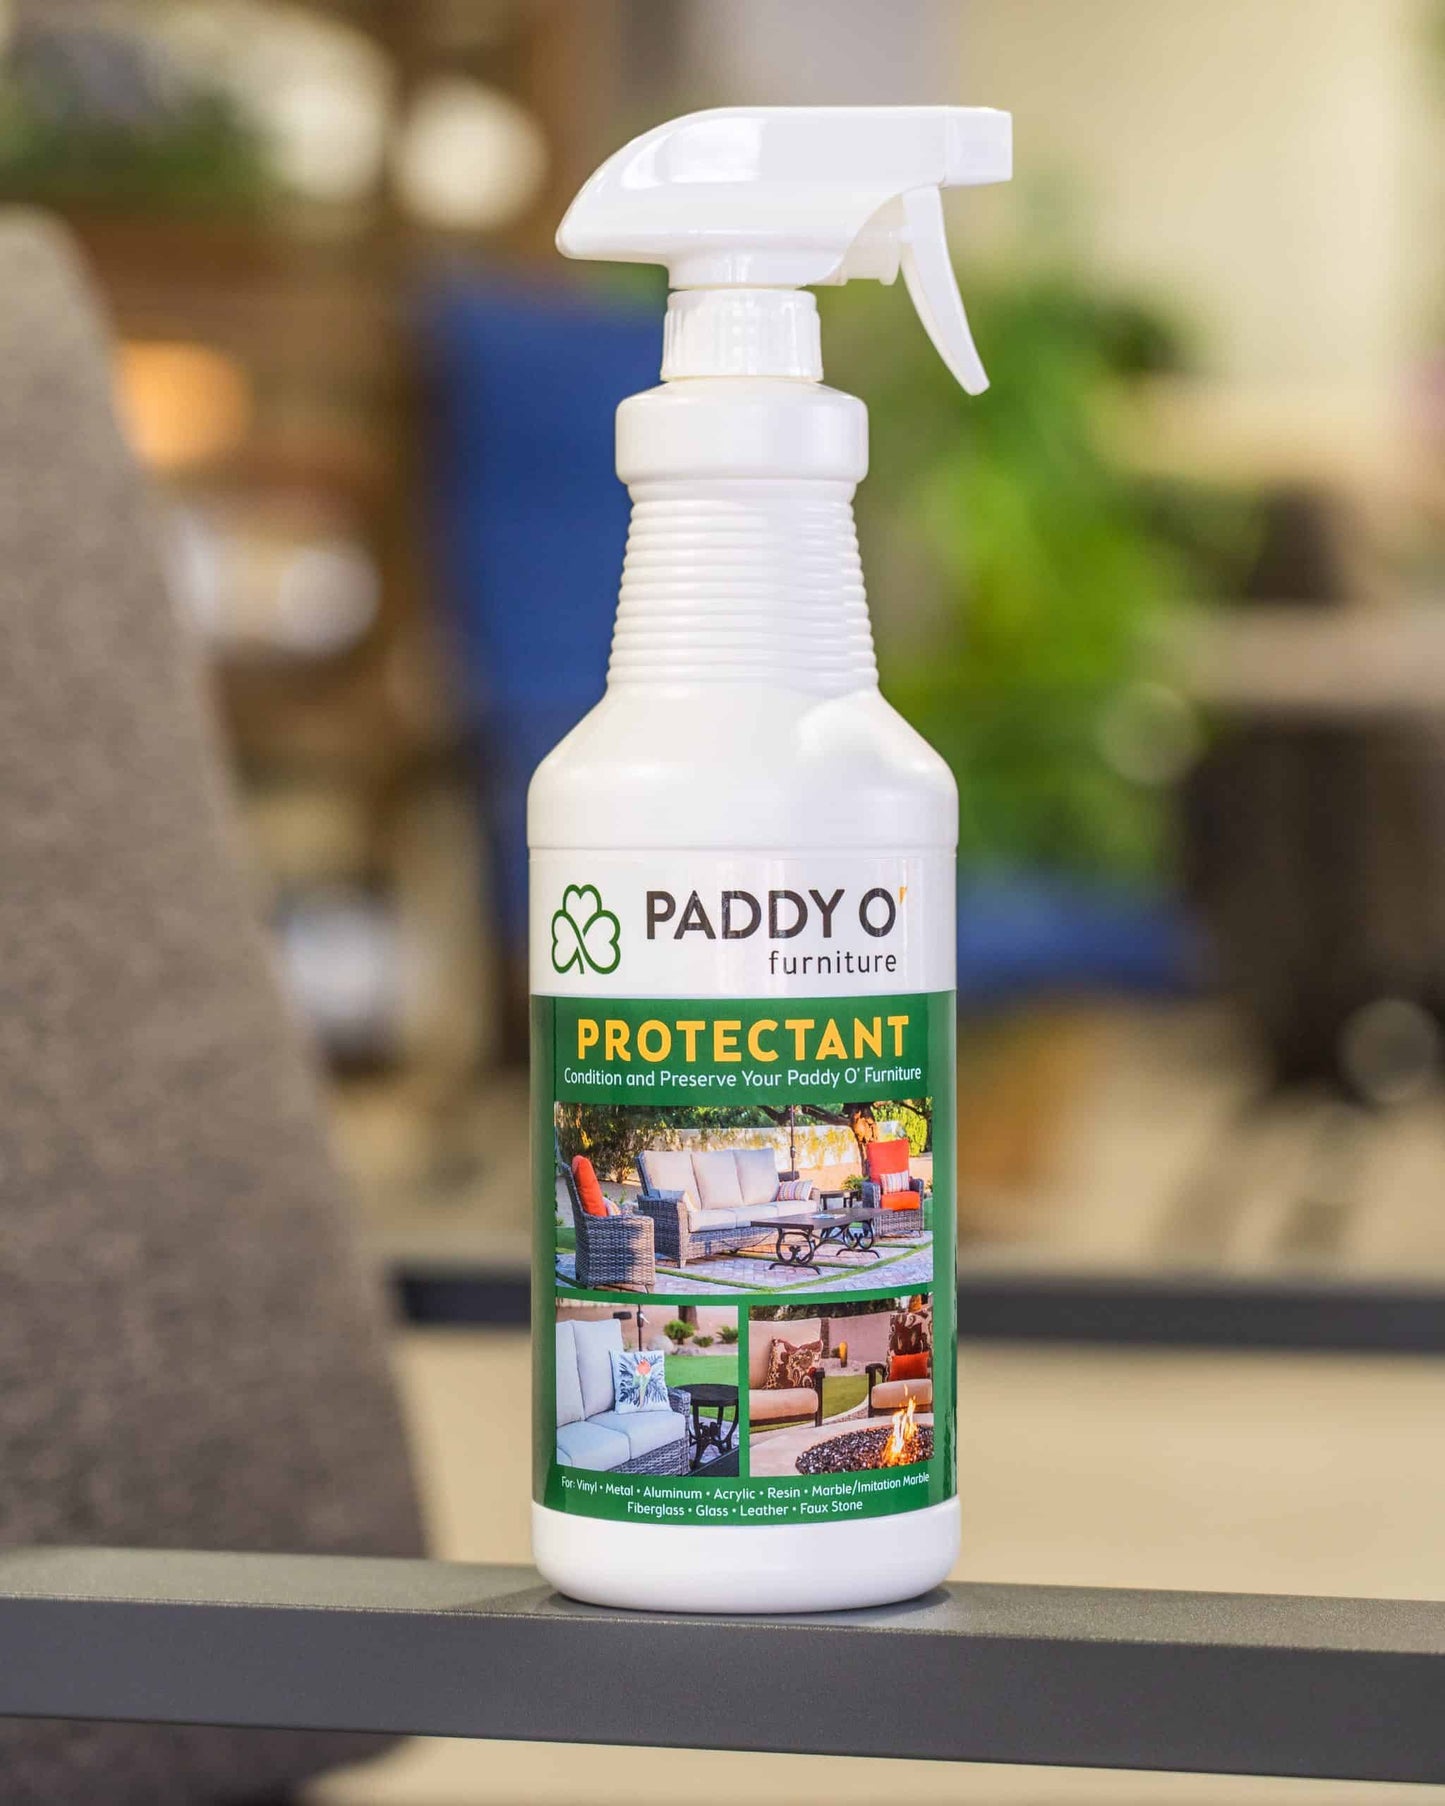 Paddy O' | Protectant spray bottle